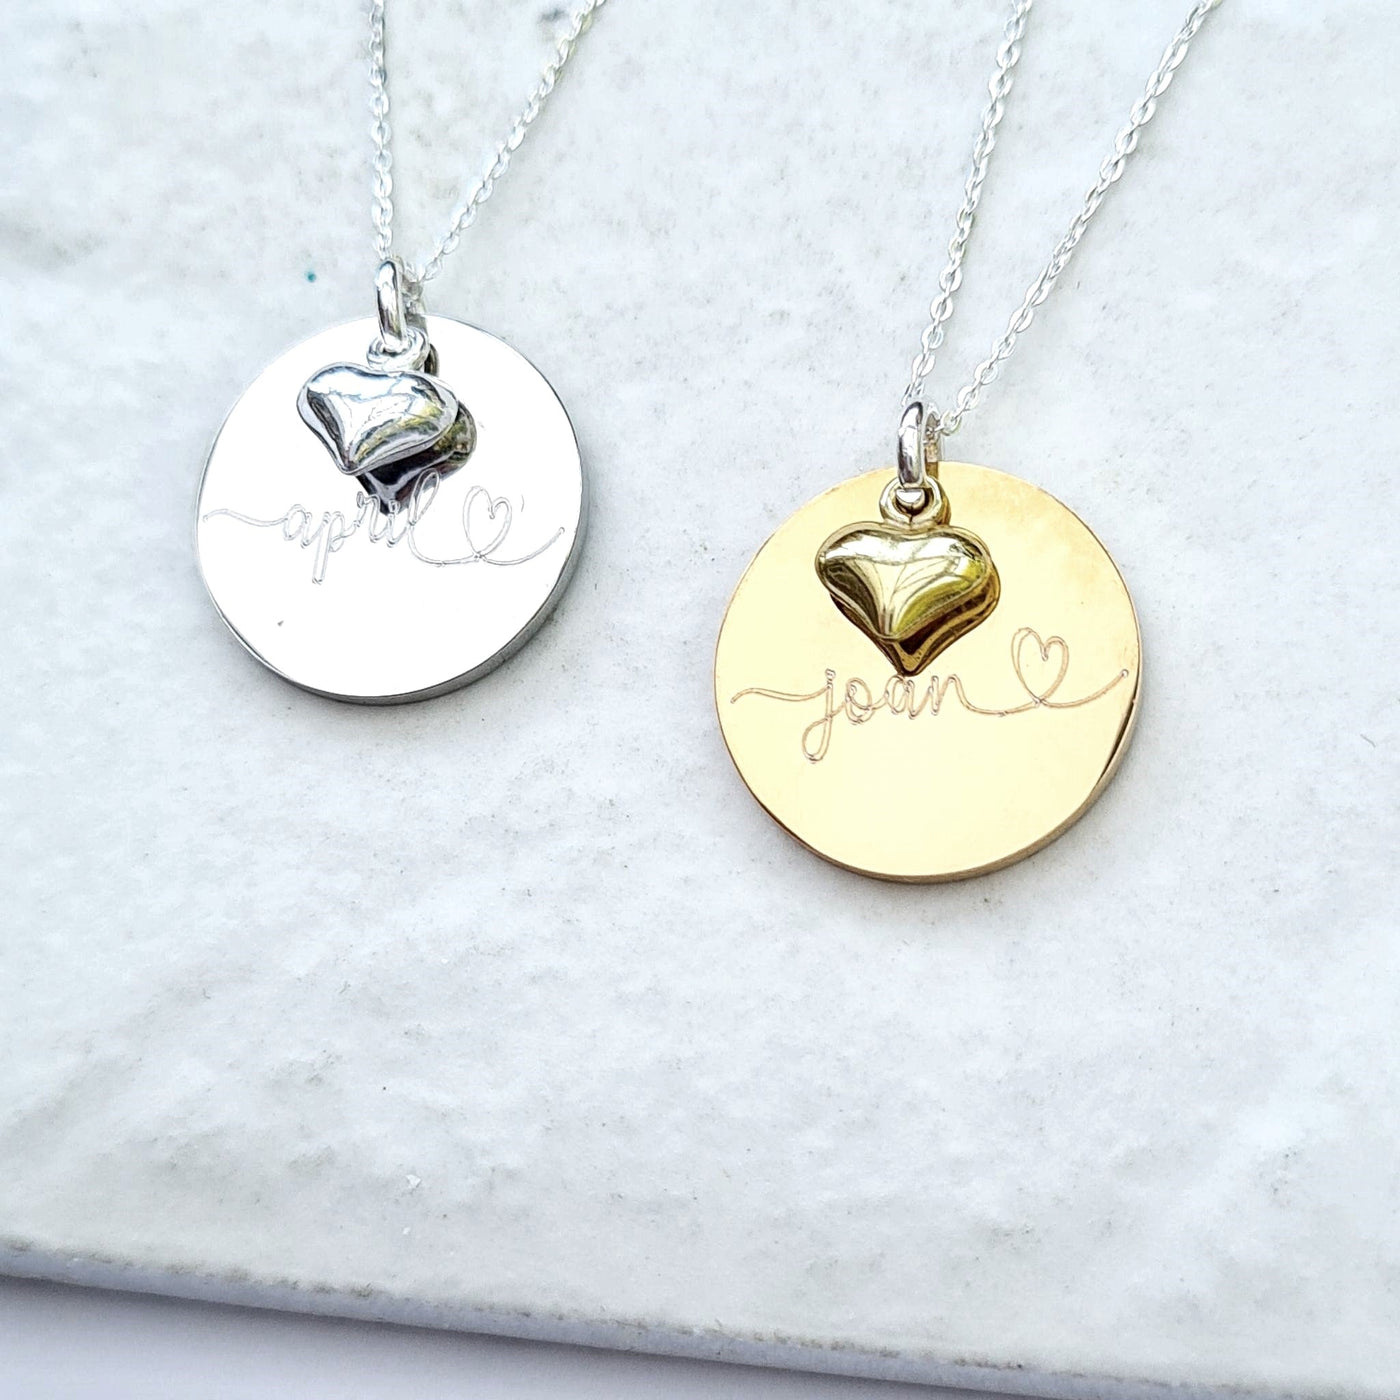 Personalised Luxe Necklace with Mini Heart